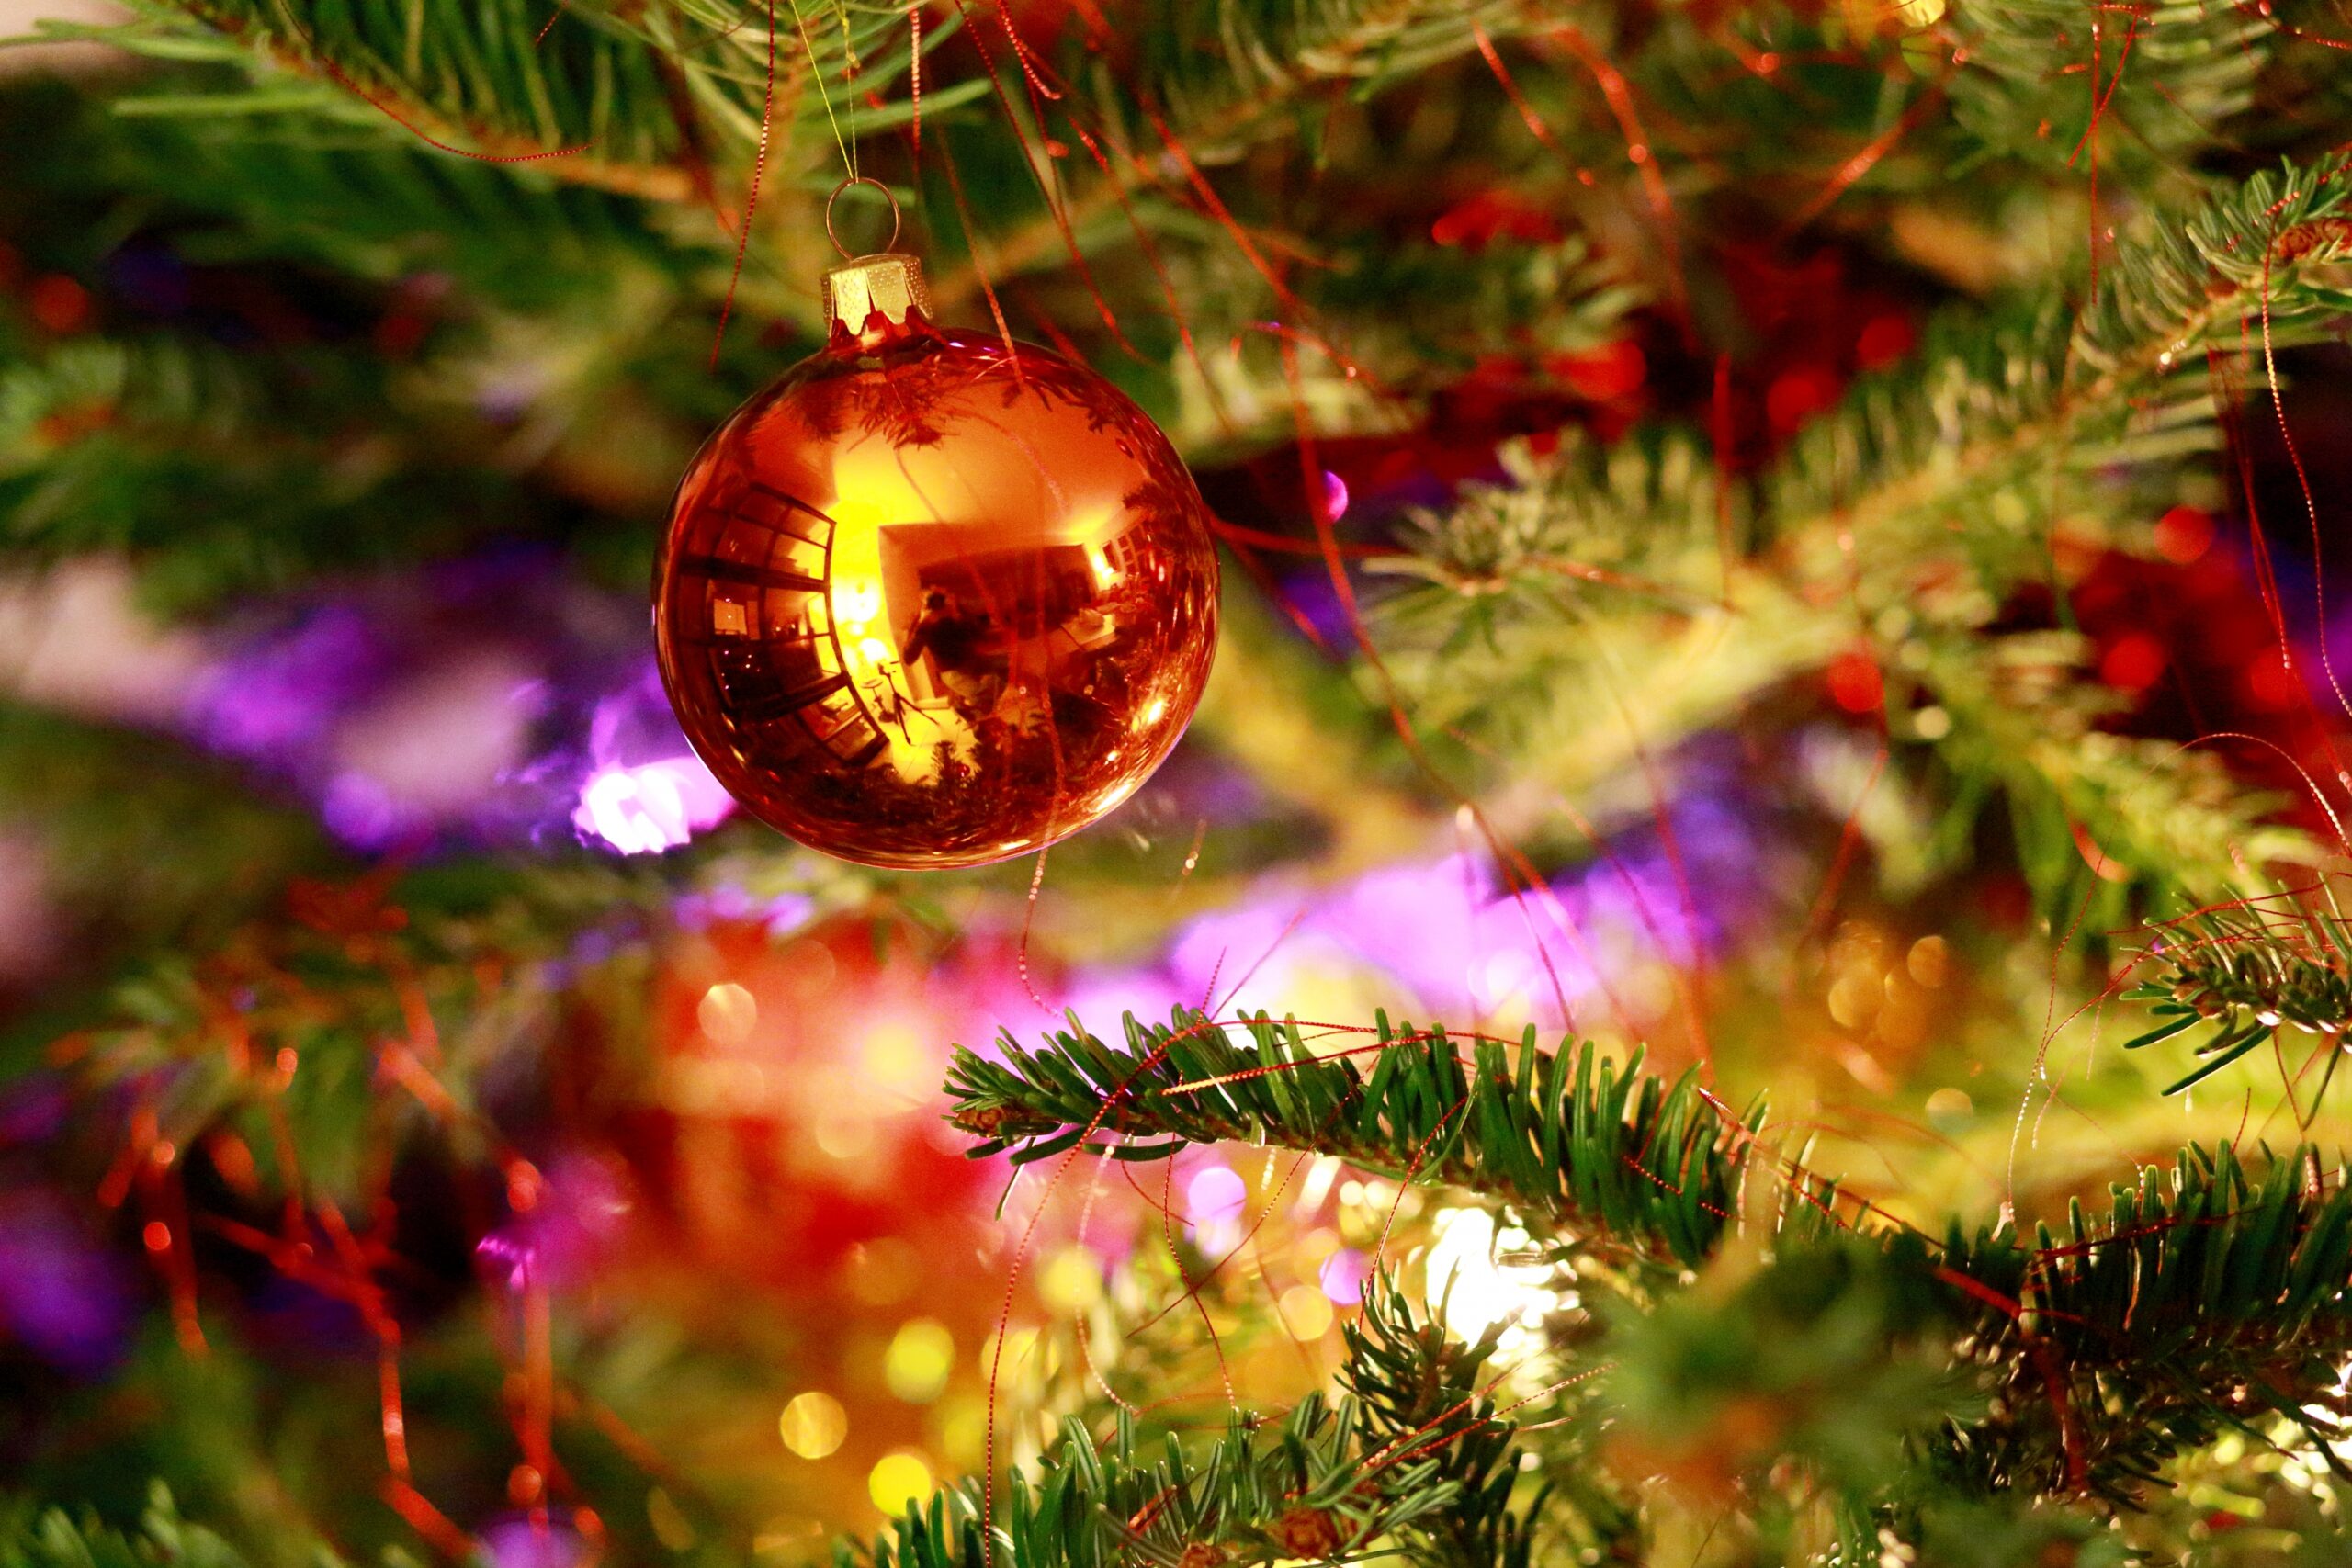 An ornament hangs on a tree